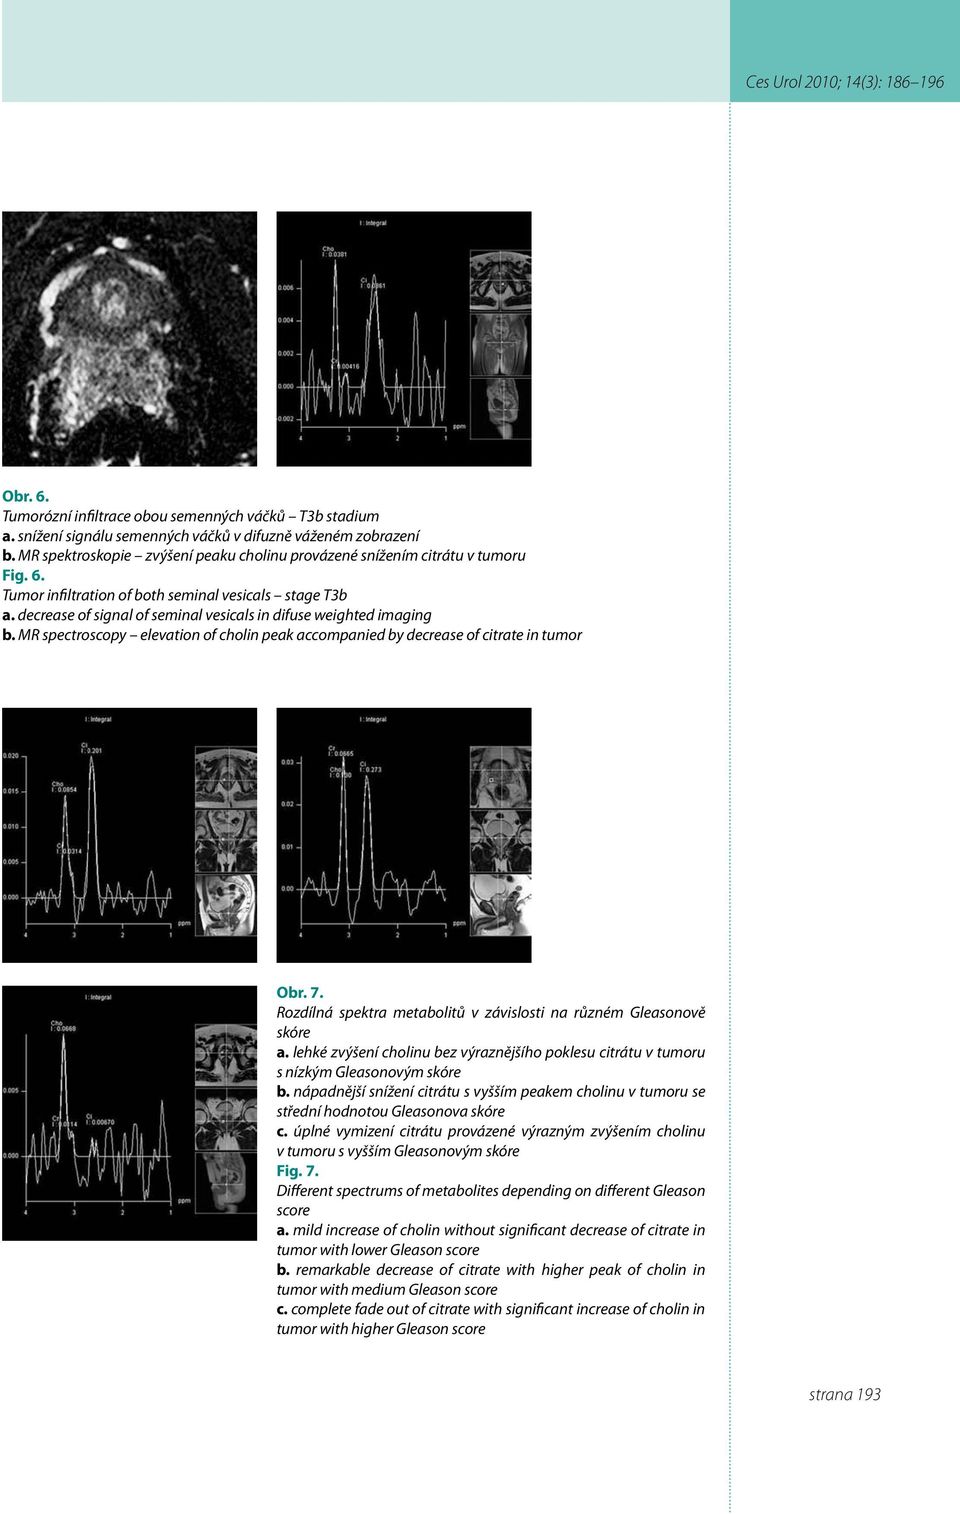 decrease of signal of seminal vesicals in difuse weighted imaging b. MR spectroscopy elevation of cholin peak accompanied by decrease of citrate in tumor Obr. 7.